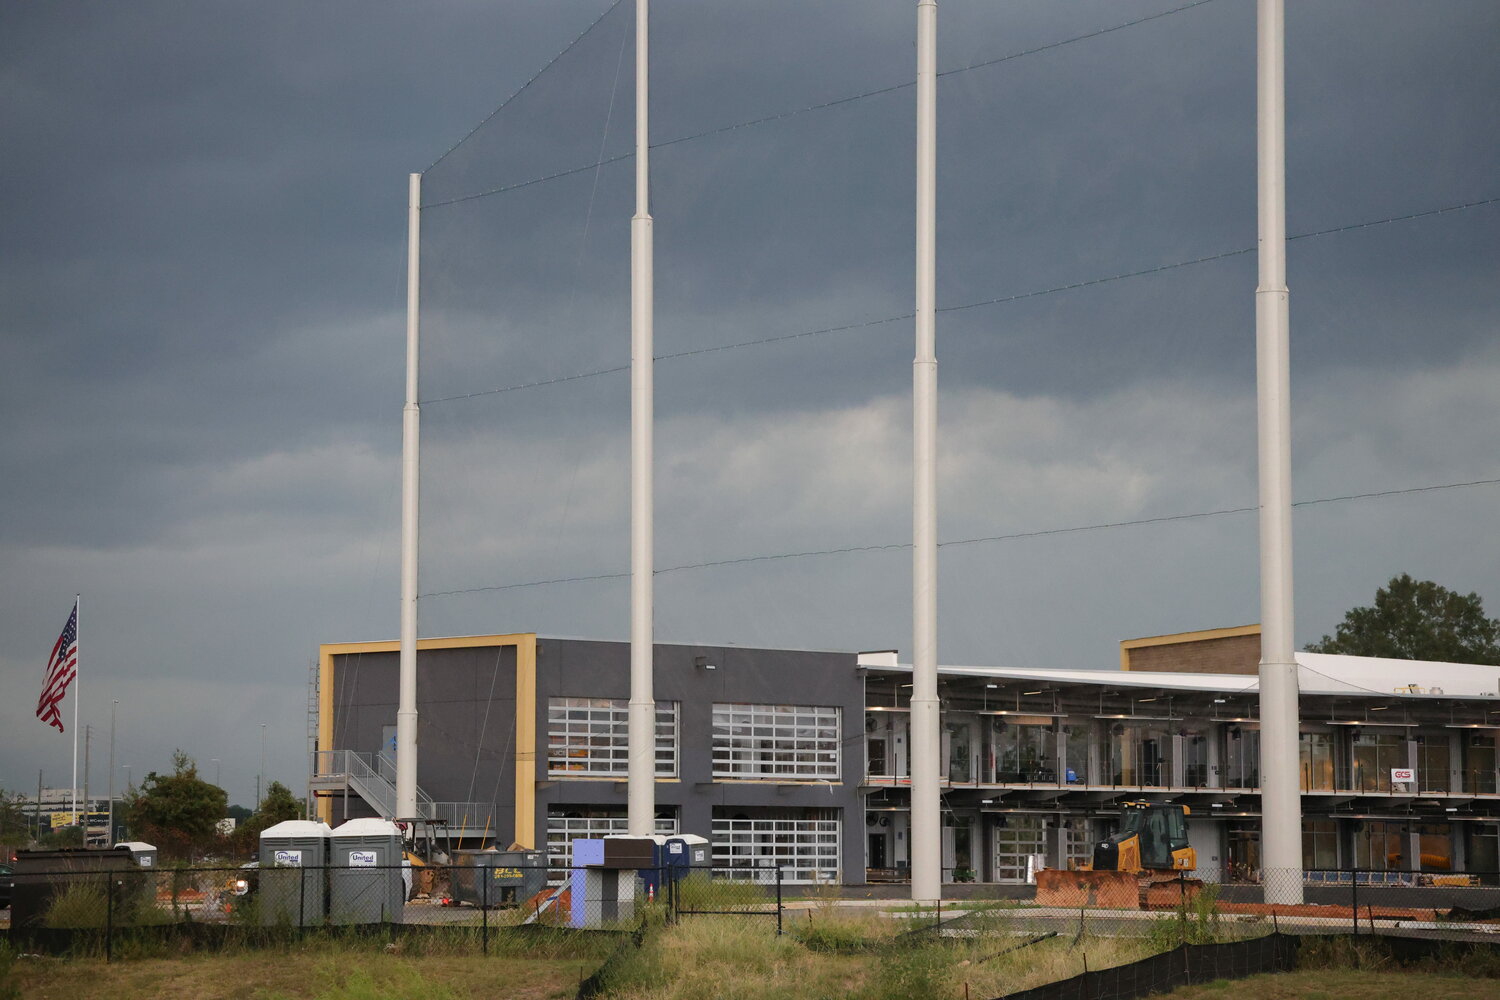 According to David Rogers, vice president of economic development in Mobile, the construction of the Top Golf has reached a milestone. “You are starting to see the poles and nets that are coming out of the ground,” said Rogers. “It is really unique because you can really see this facility from far away.”